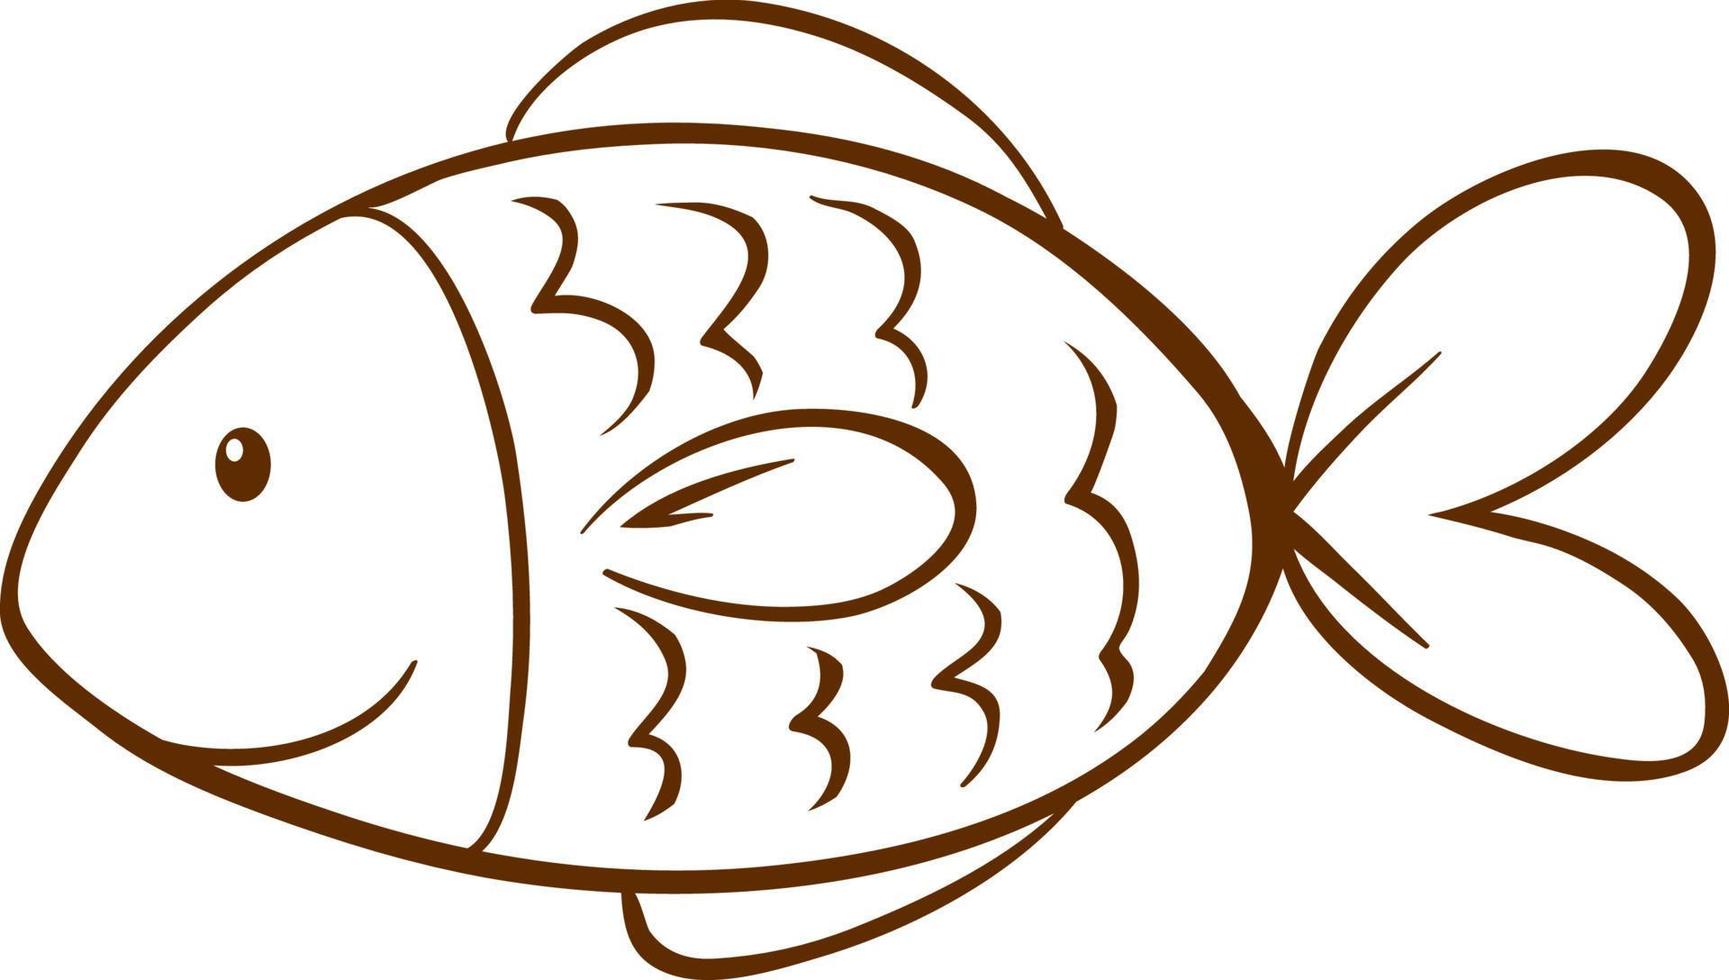 Fish in doodle simple style on white background vector